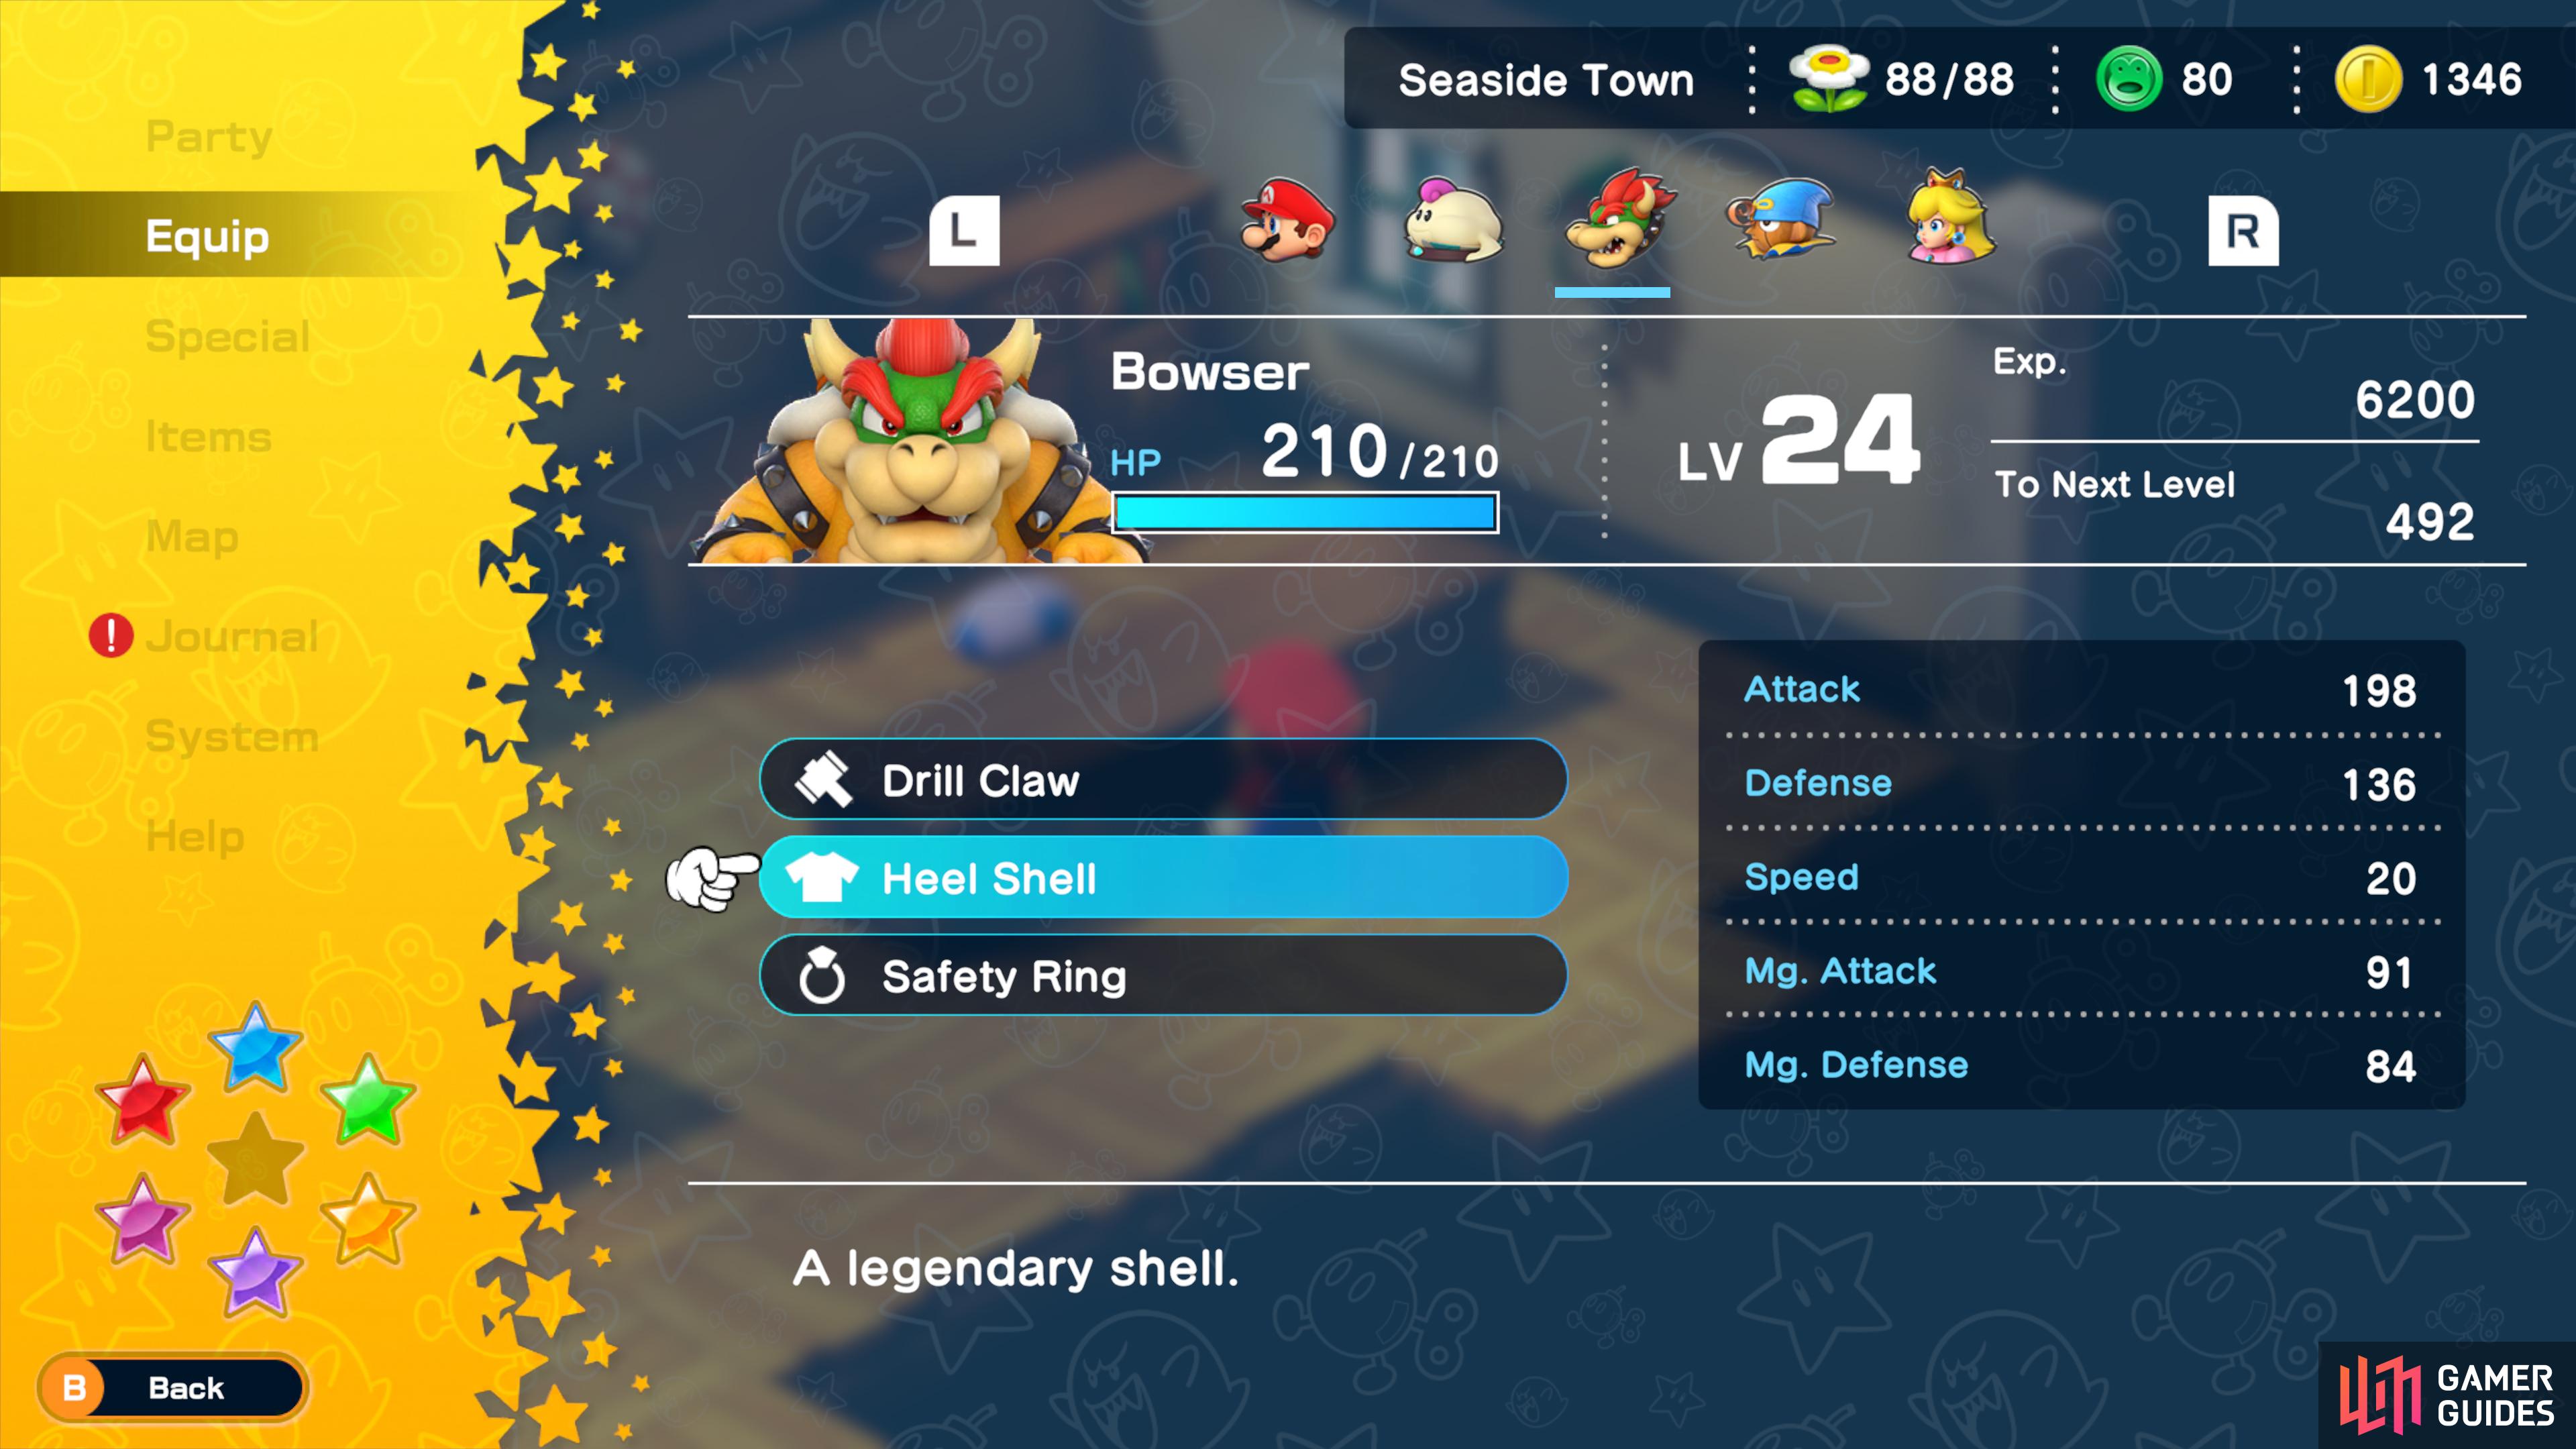 The Heel Shell is Bowser’s best armor.